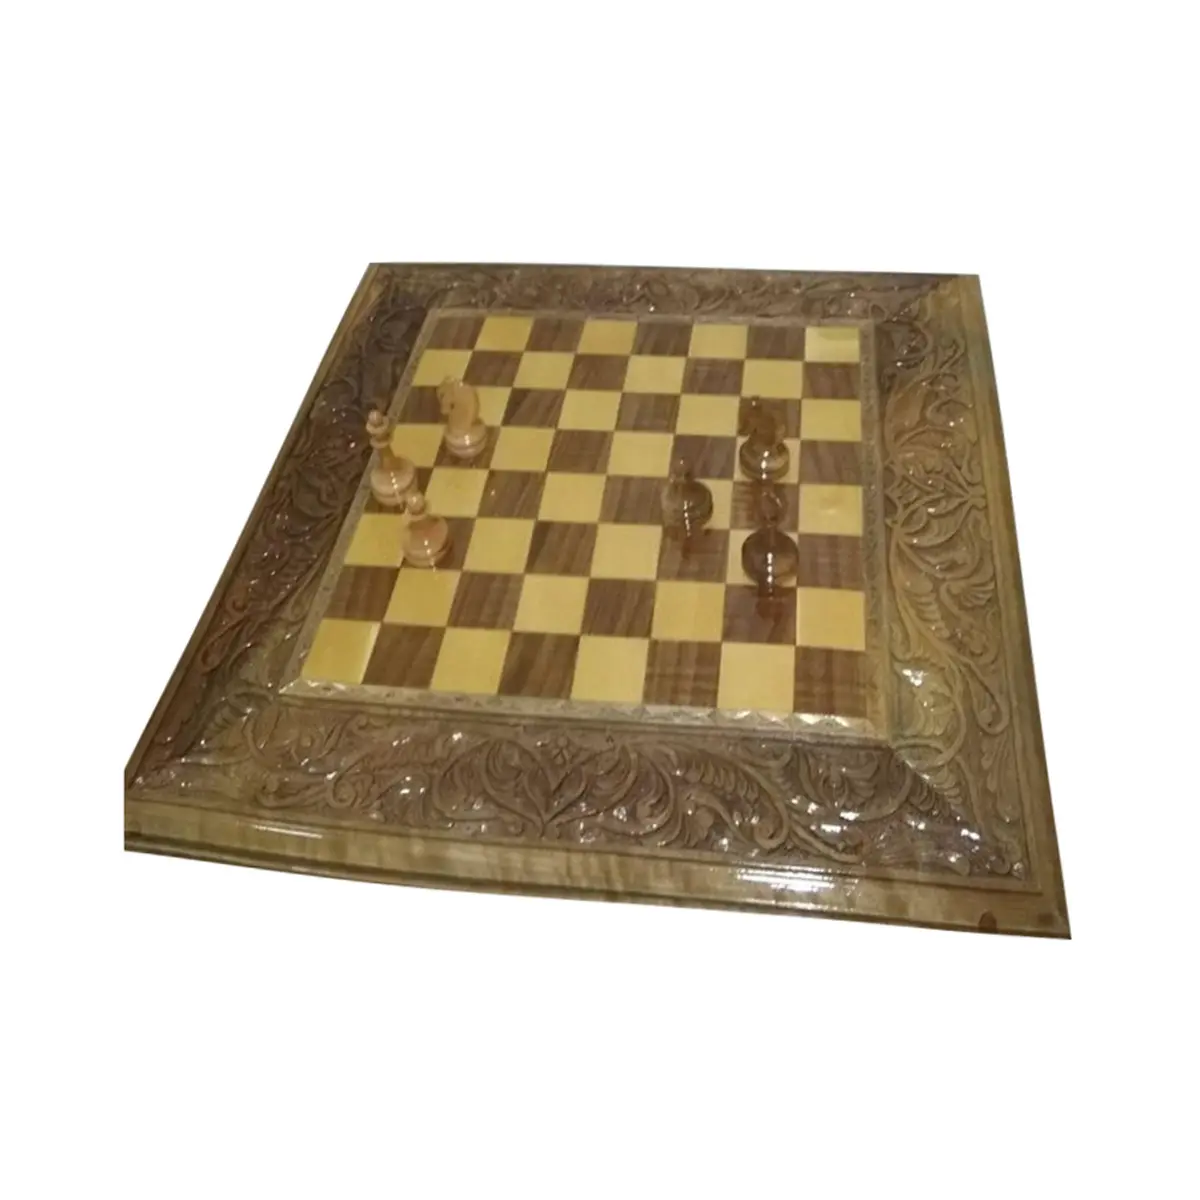 Gorgeous gift chess - intellectual art in a luxurious package handmade wood original gift for a man